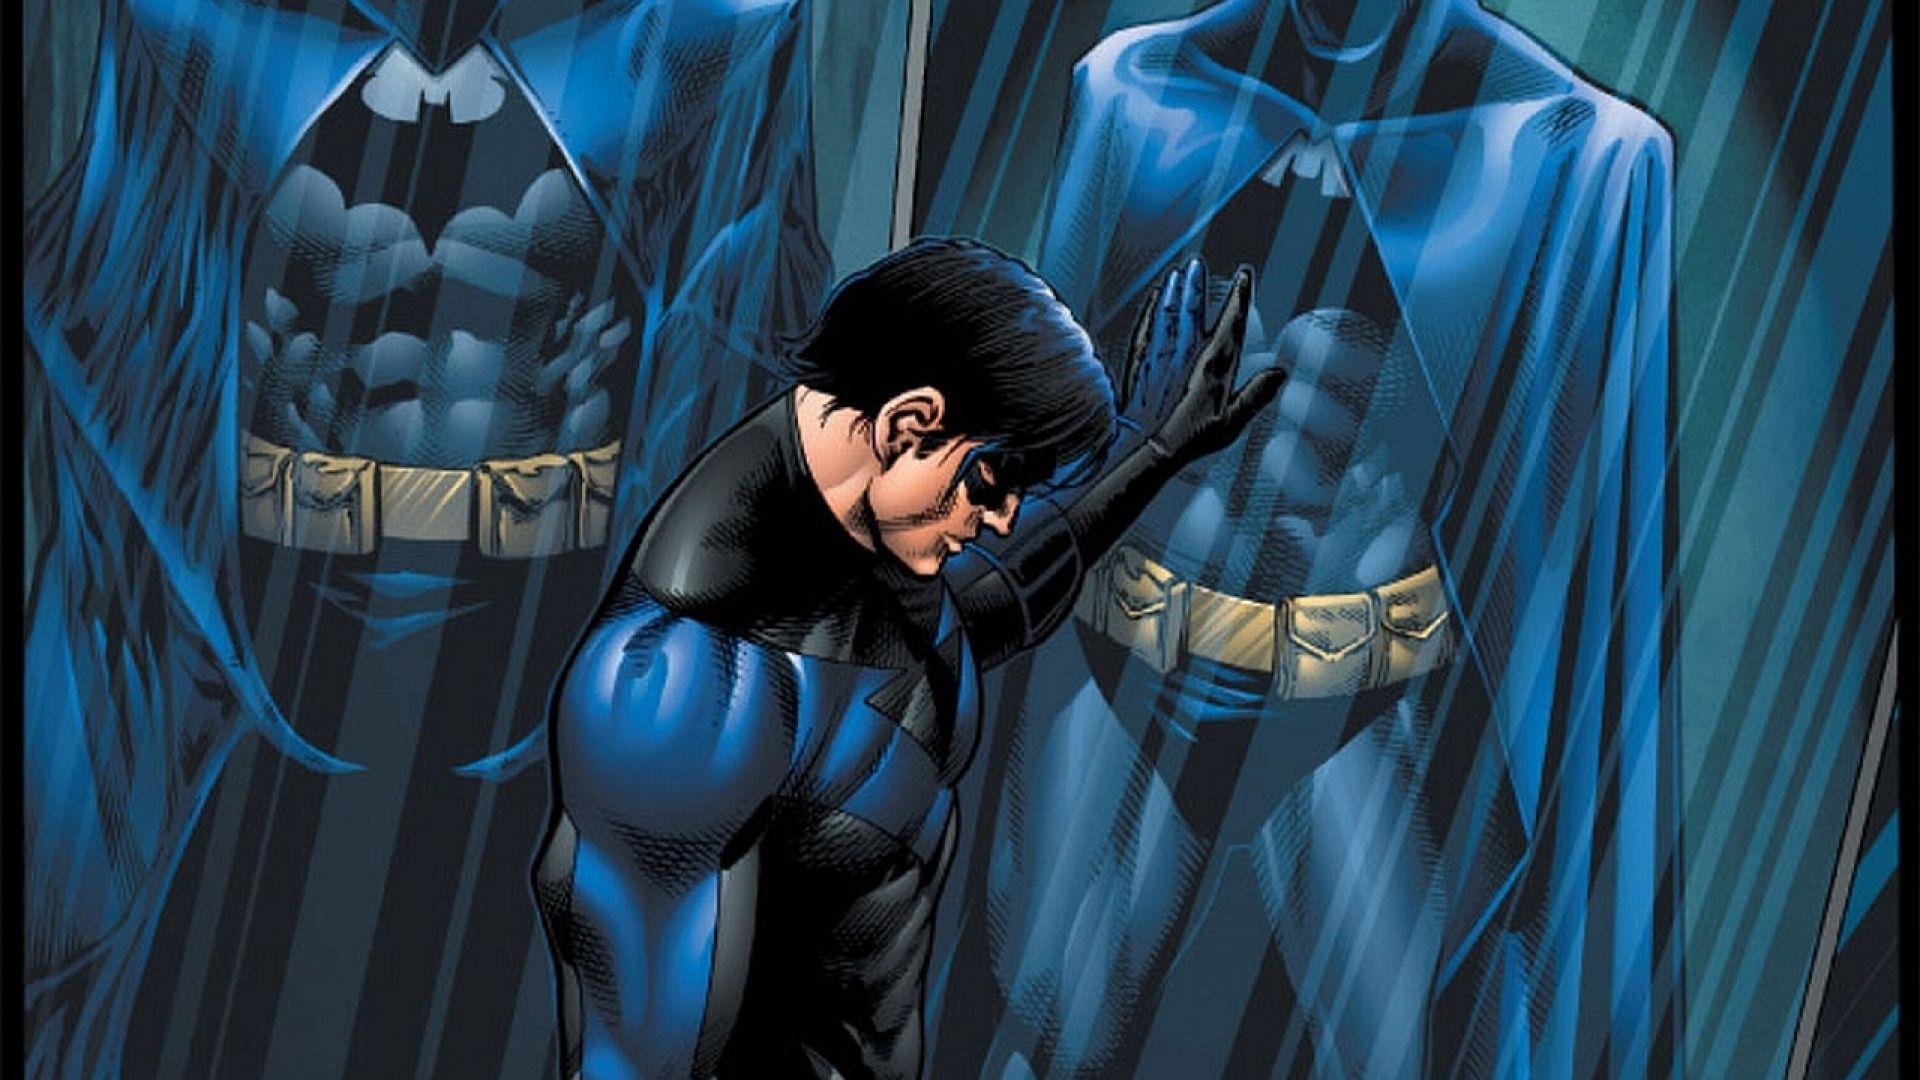 Will We See Dick Grayson In The DCCU?